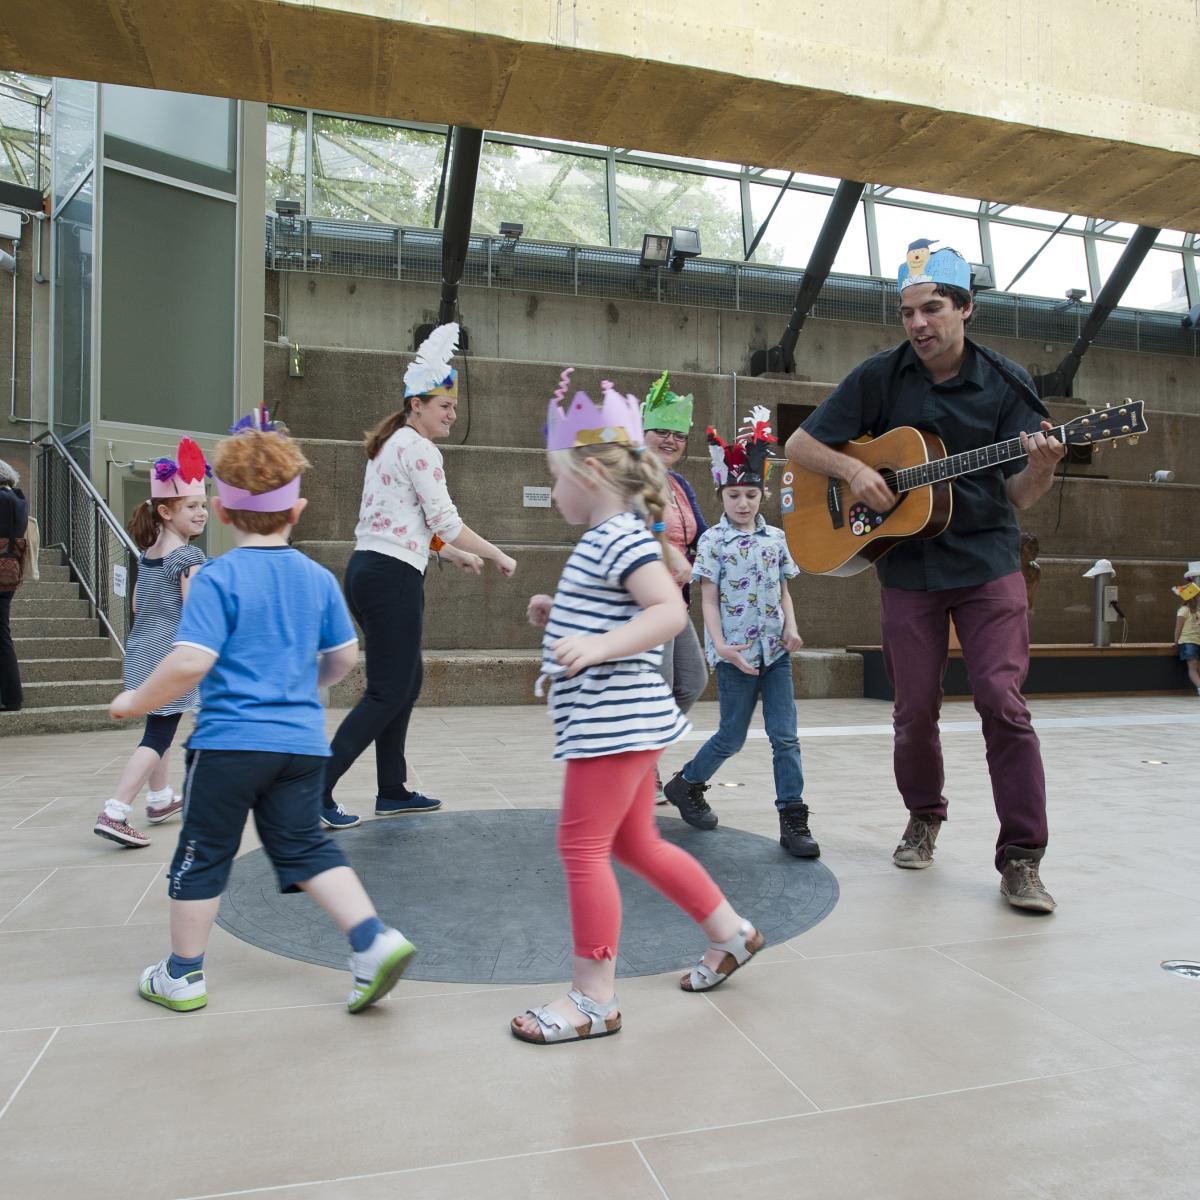 Family workshop at Cutty Sark - group of children and guitar player